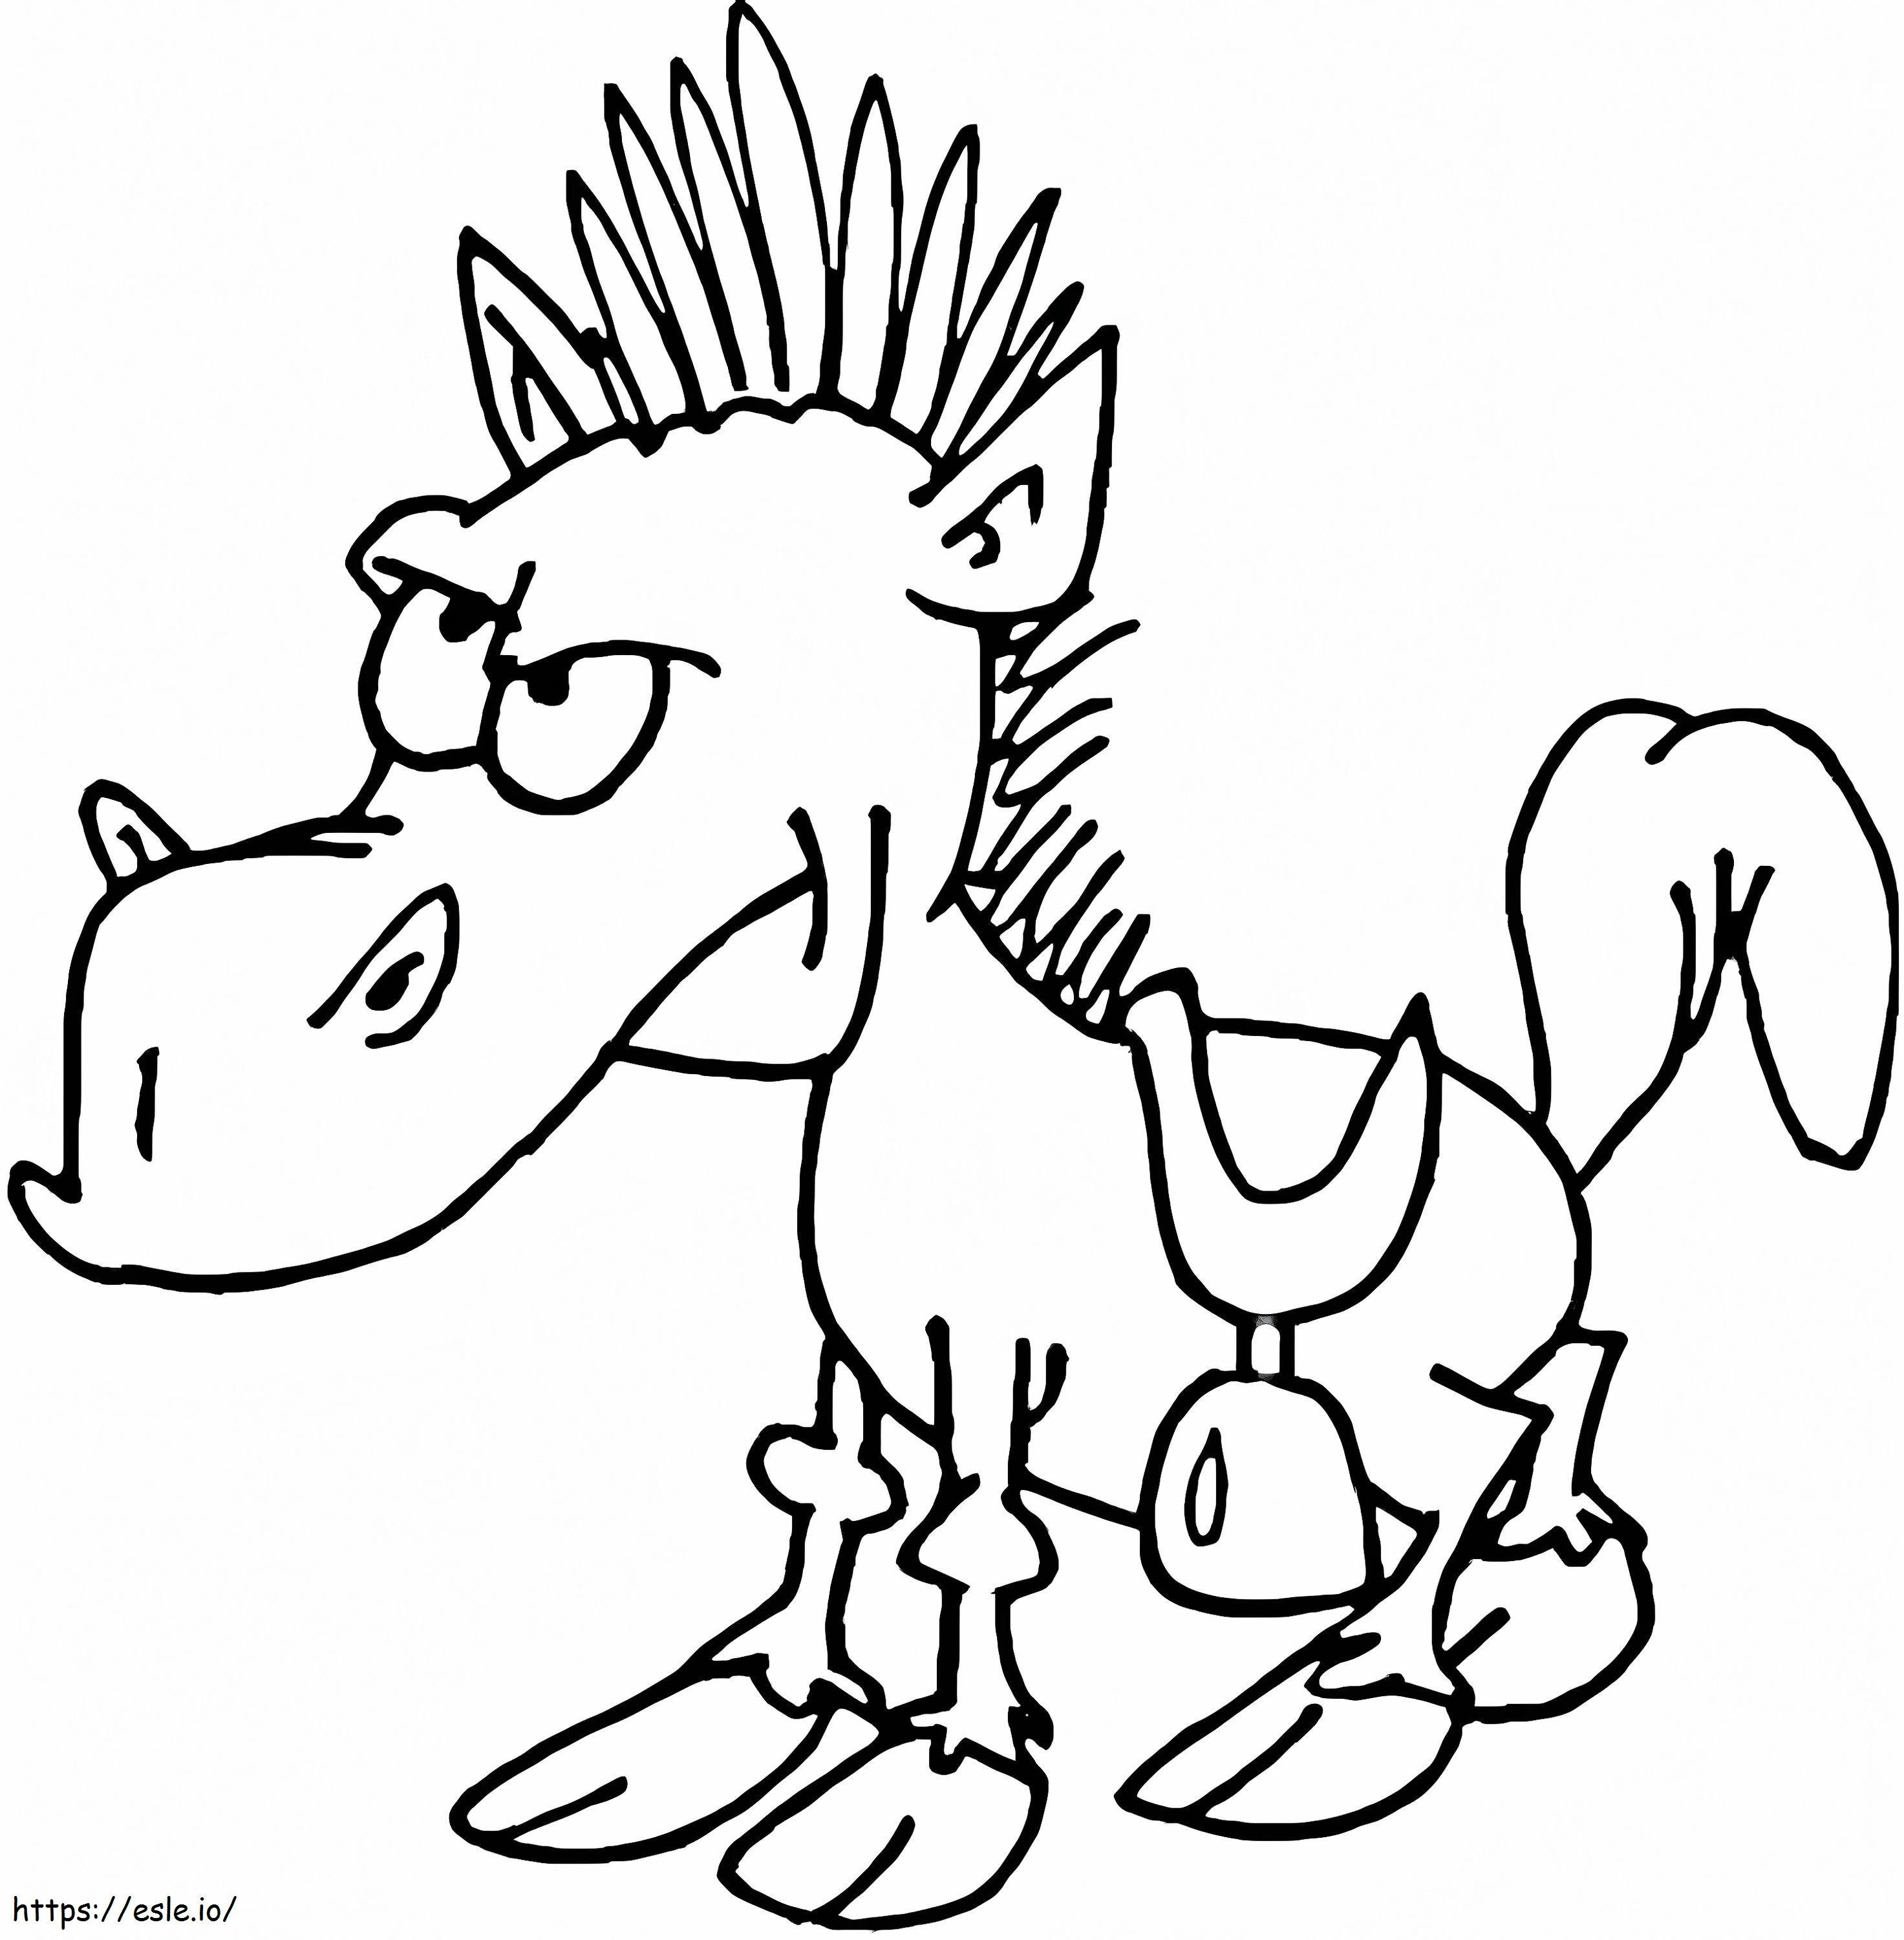 Mohawk Horse coloring page